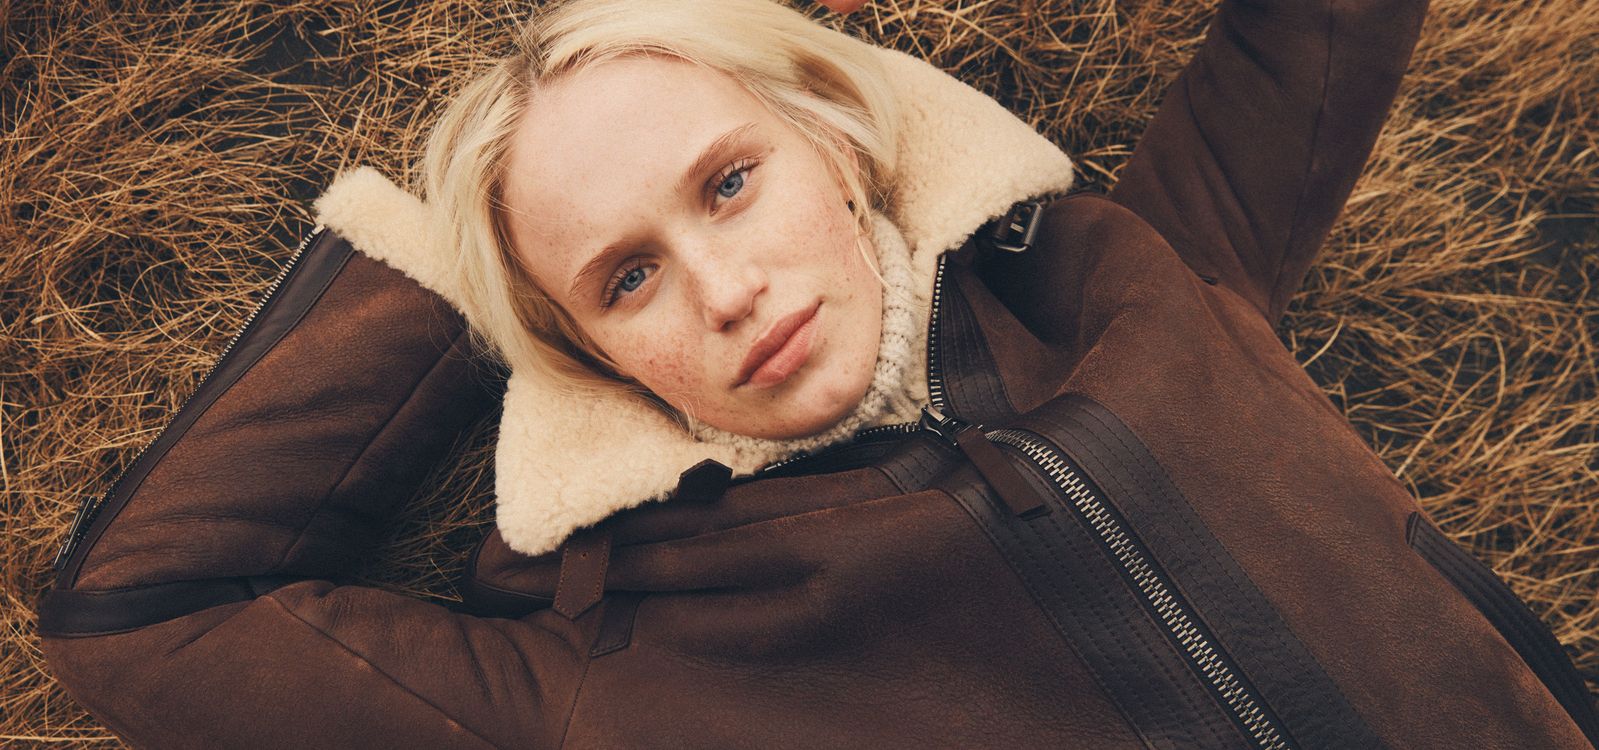 Female Model wearing the Belstaff Launch Jacket in Saddle Brown/Cord with the Fenn Rollneck Jumper in Sand.